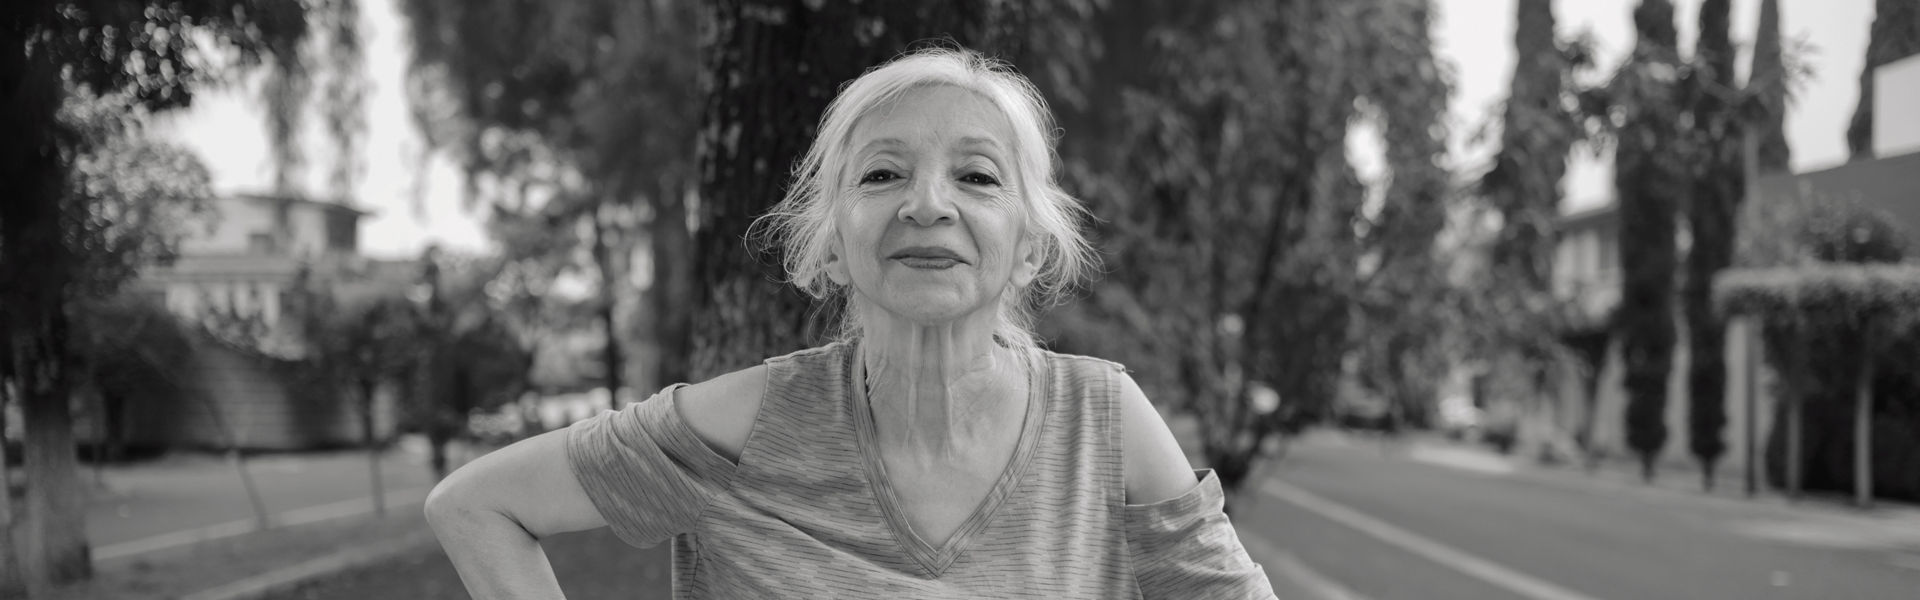 1062565330
Portrait of an elderly white-haired Mexican woman while she exercises in a public park.